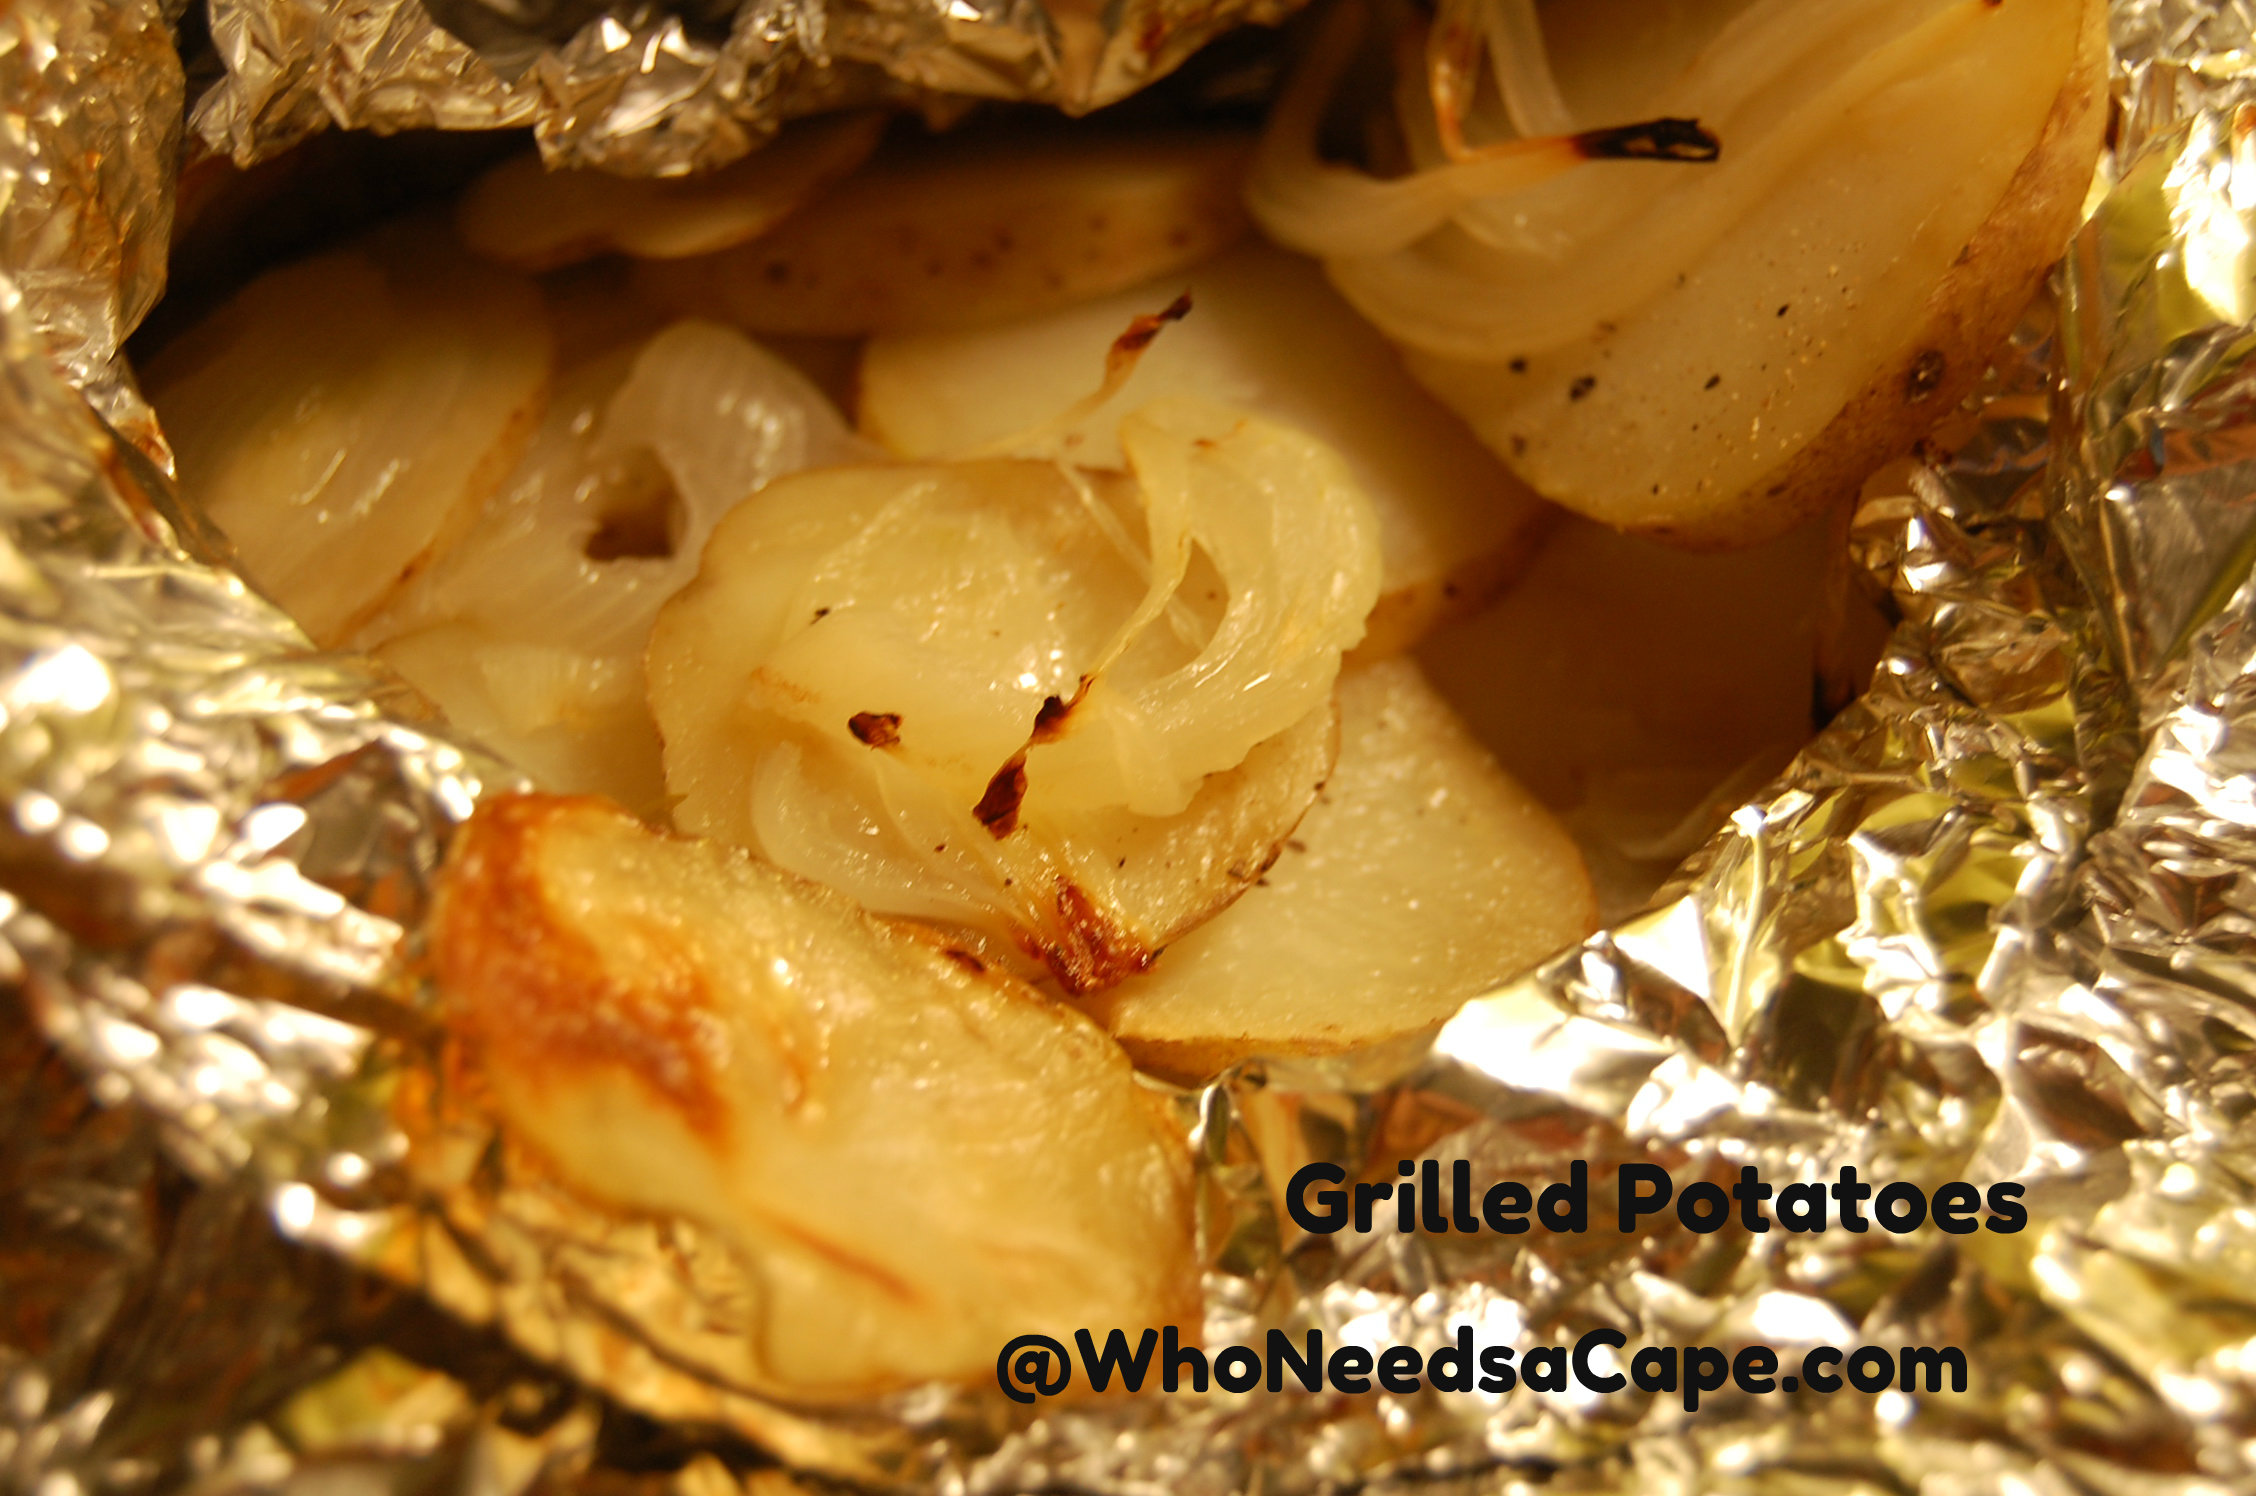 Grilled Potatoes are such a fantastic side dish for summer dining. Sliced, seasoned and prepared alongside a variety of entrees.